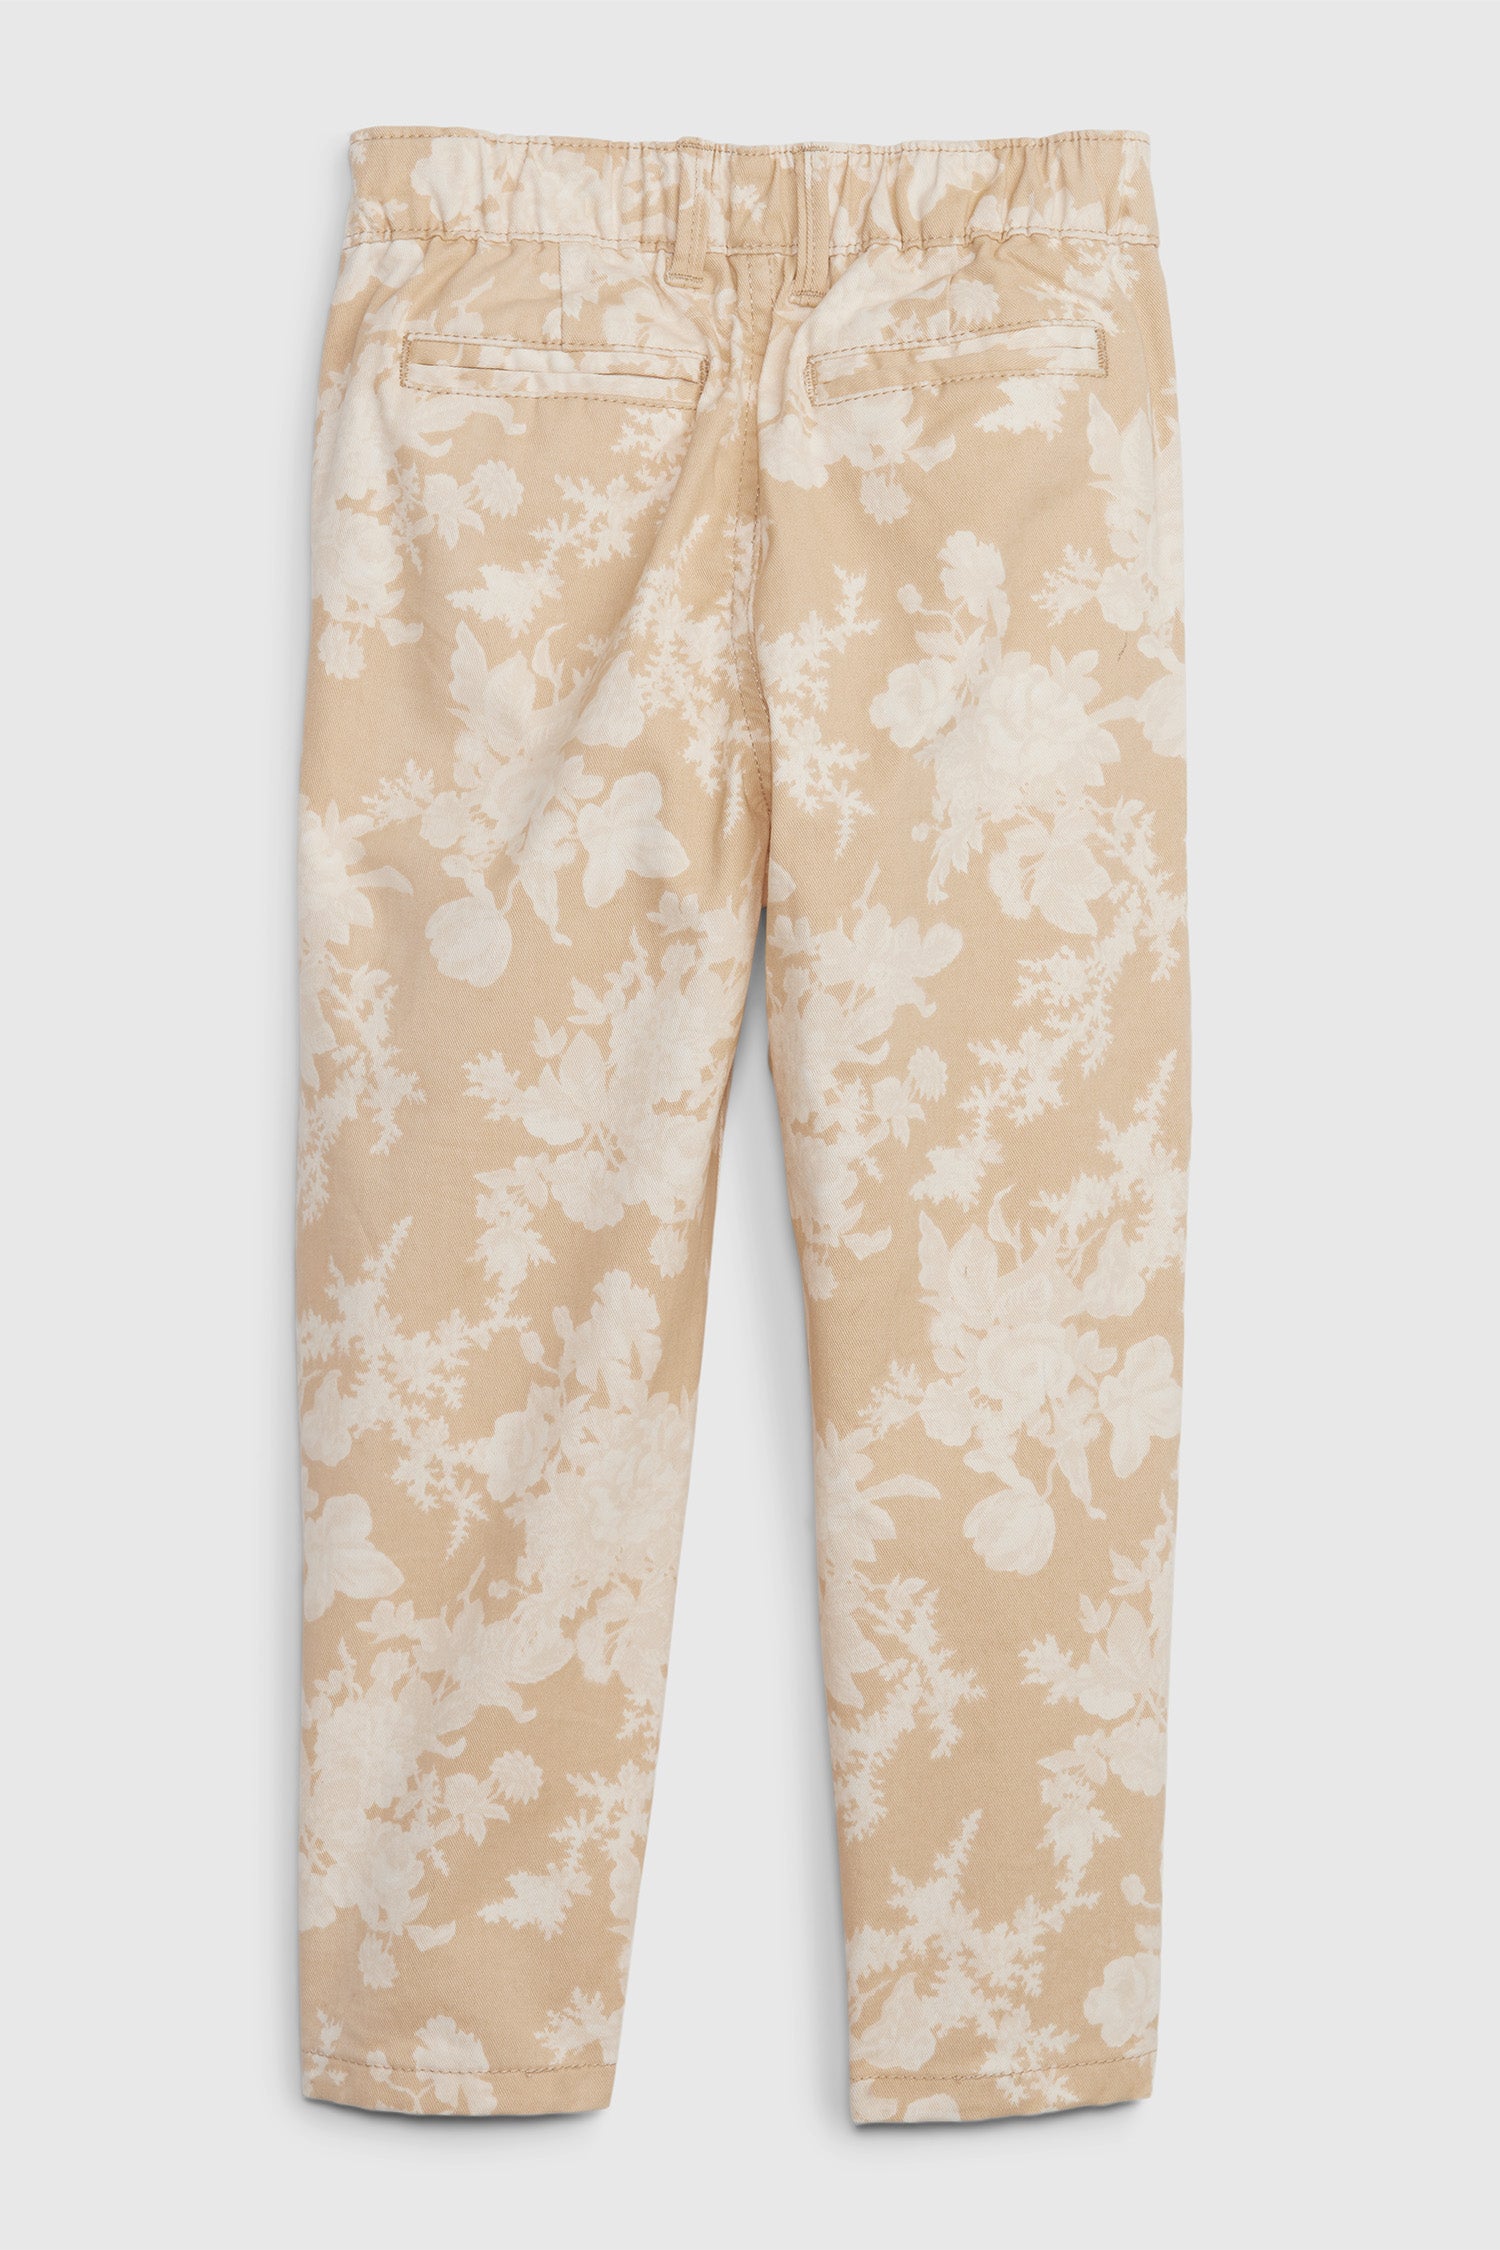 Back image of boy's toddler floral khakis with pockets